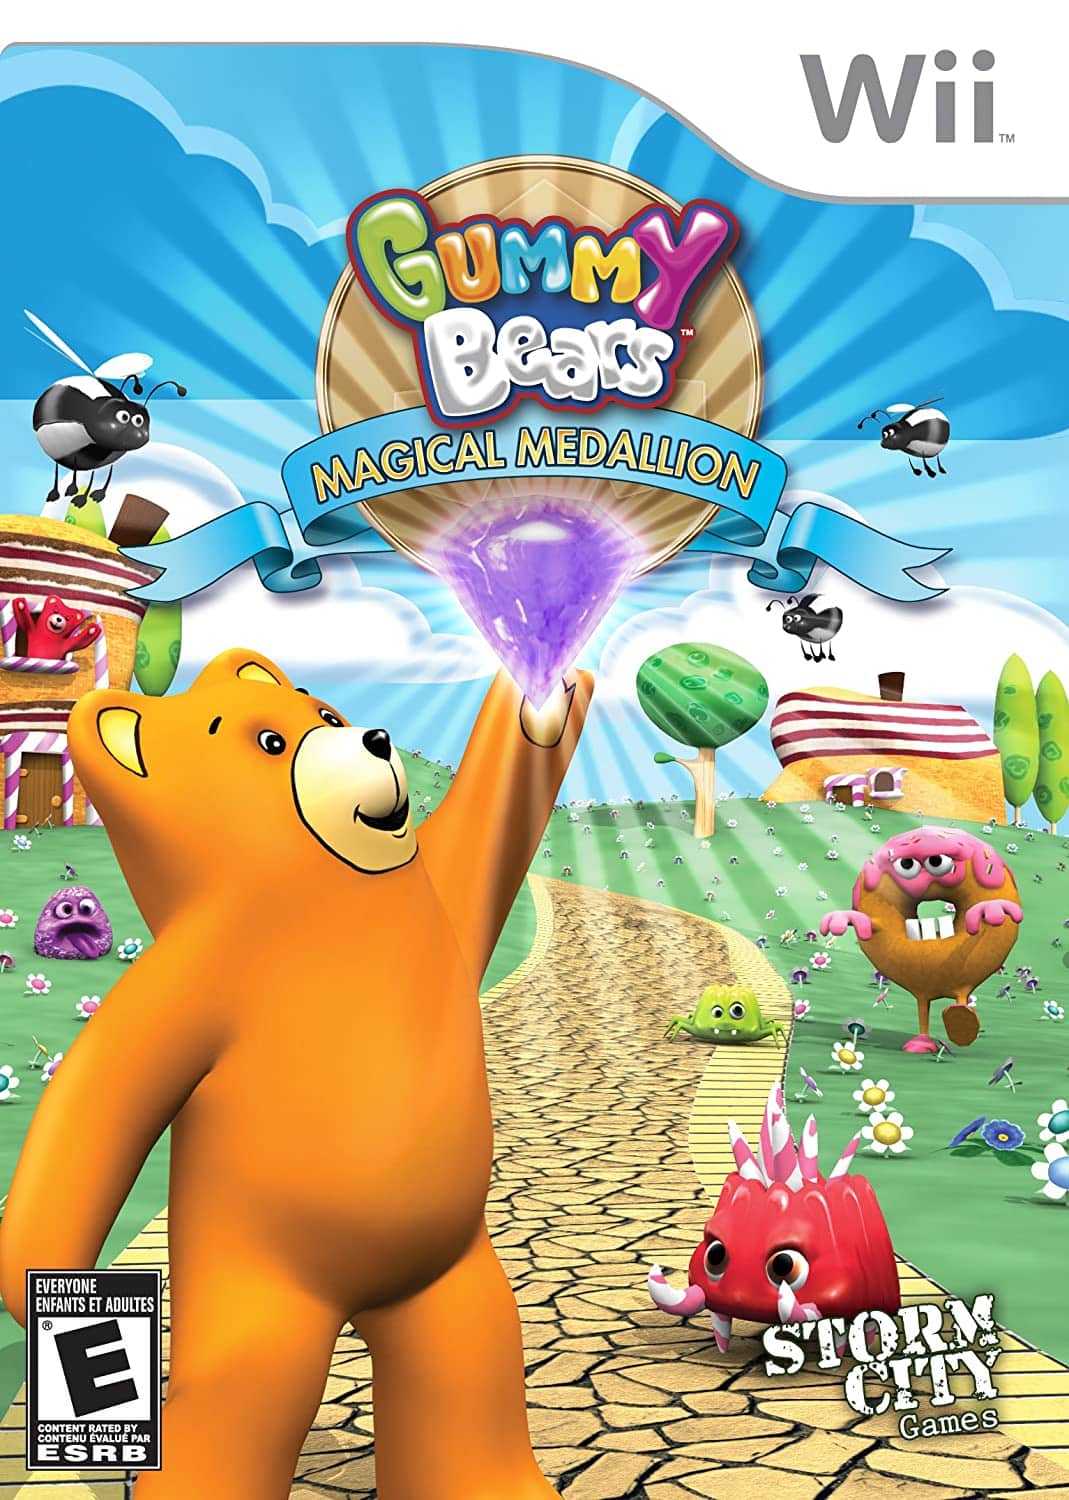 Gummy Bears: Magical Medallion player count stats